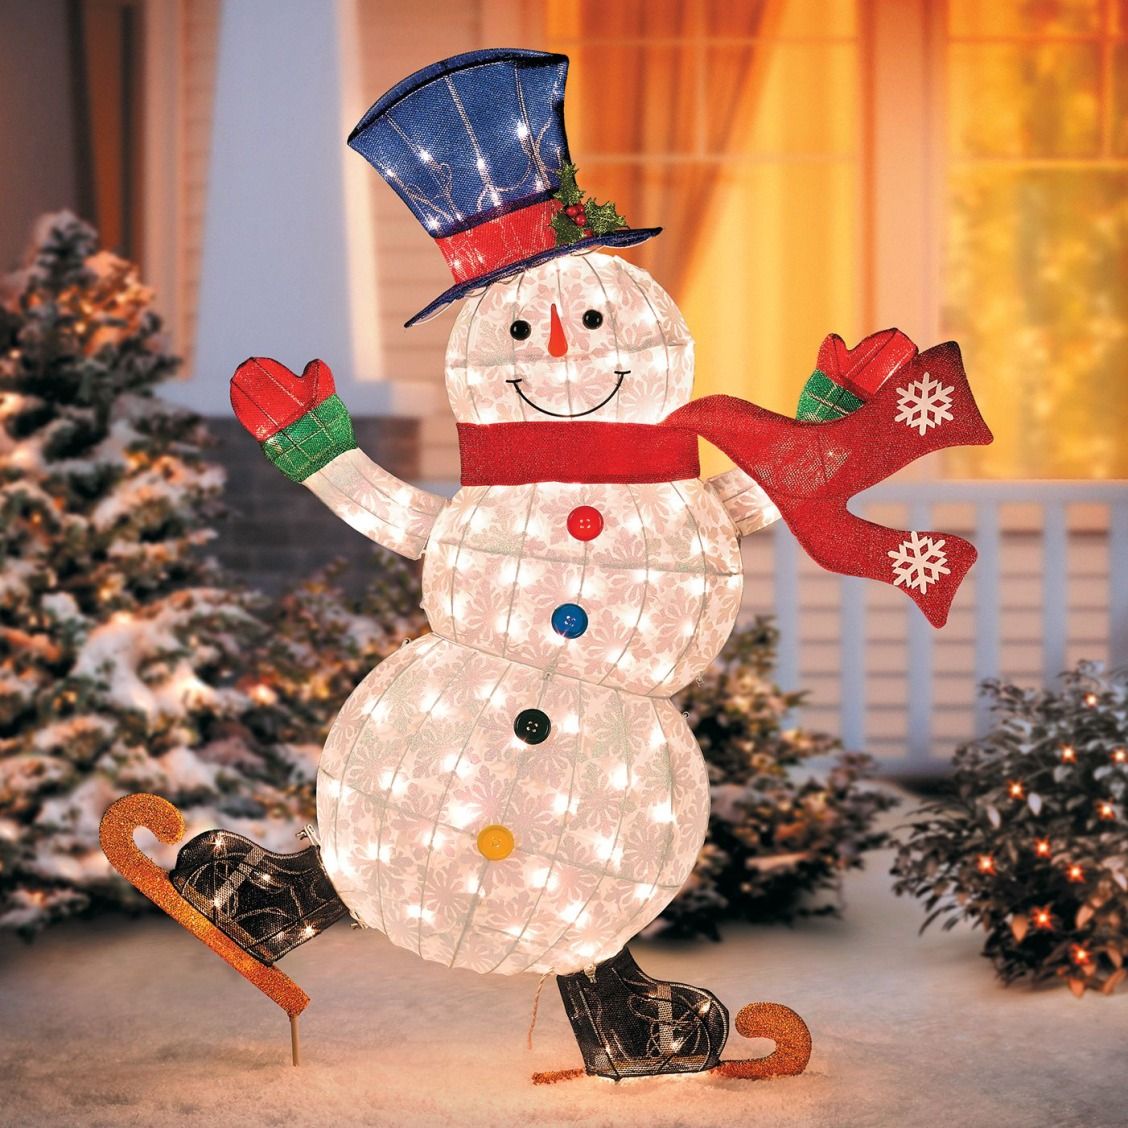 LED Xmas Snowman Decor for Christmas Outdoor Yard Party Shopping Mall Decorations MorTime 6FT Lighted Christmas Portable Snowman 